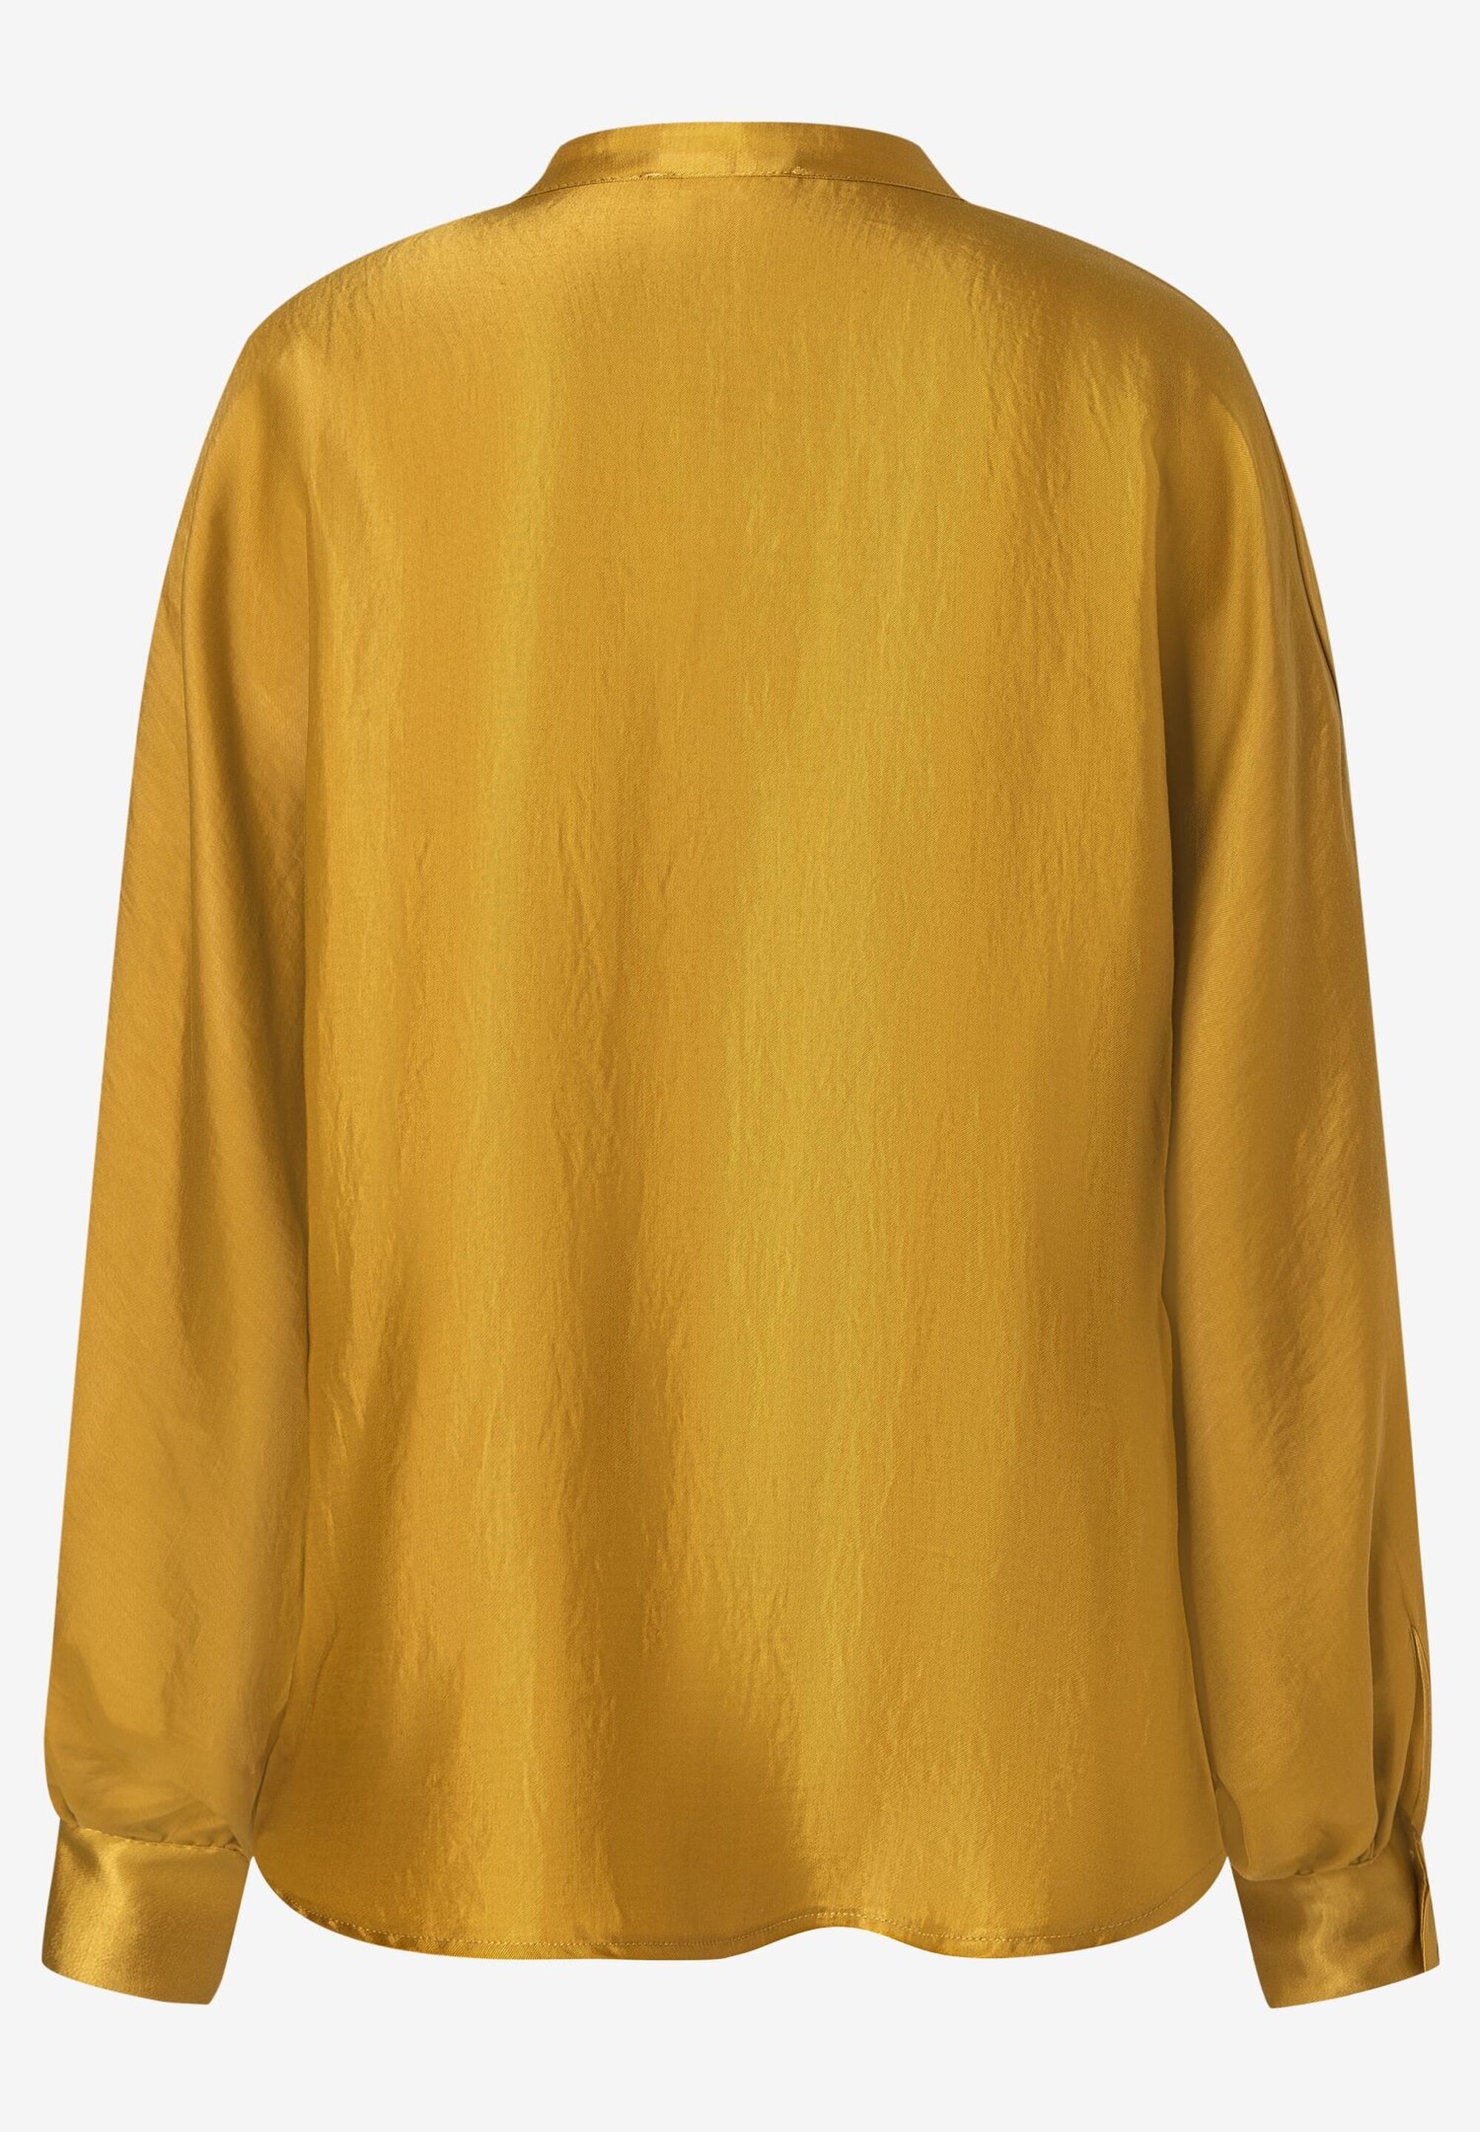 Mustard Yellow Satin Blouse With Bow_31122056_0175_04